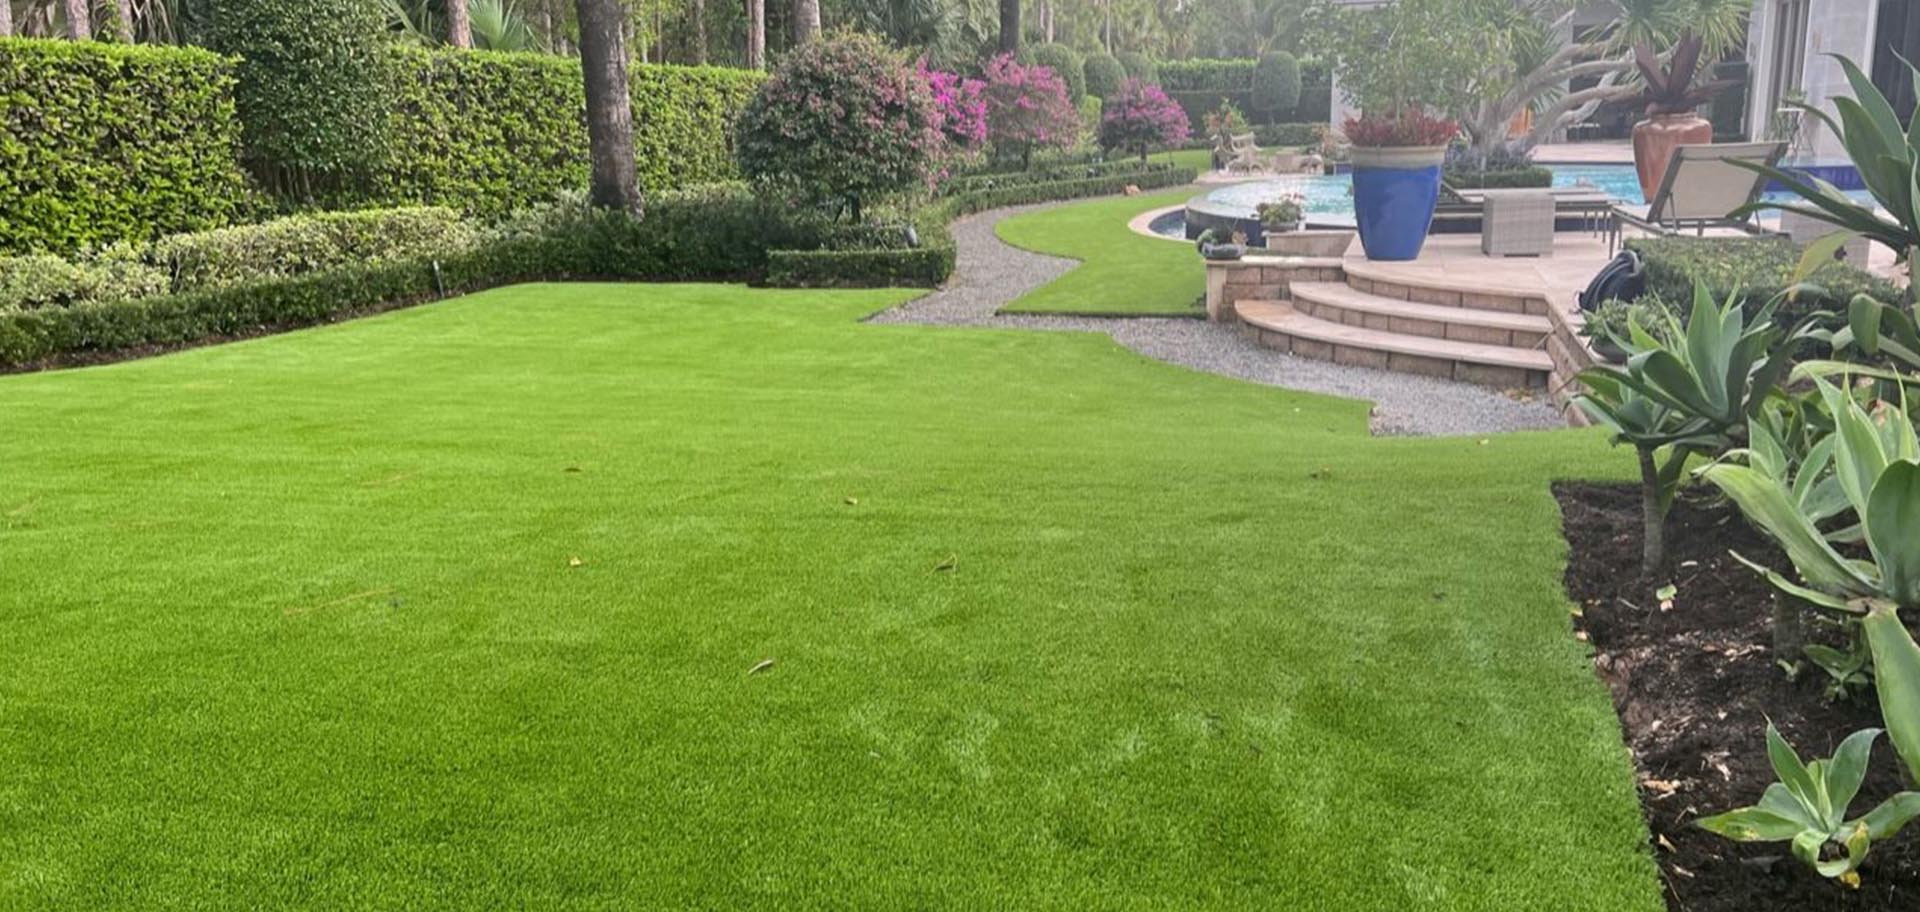 Boca Raton Artificial Grass Installation, Synthetic Turf Installation and Putting Green Installation